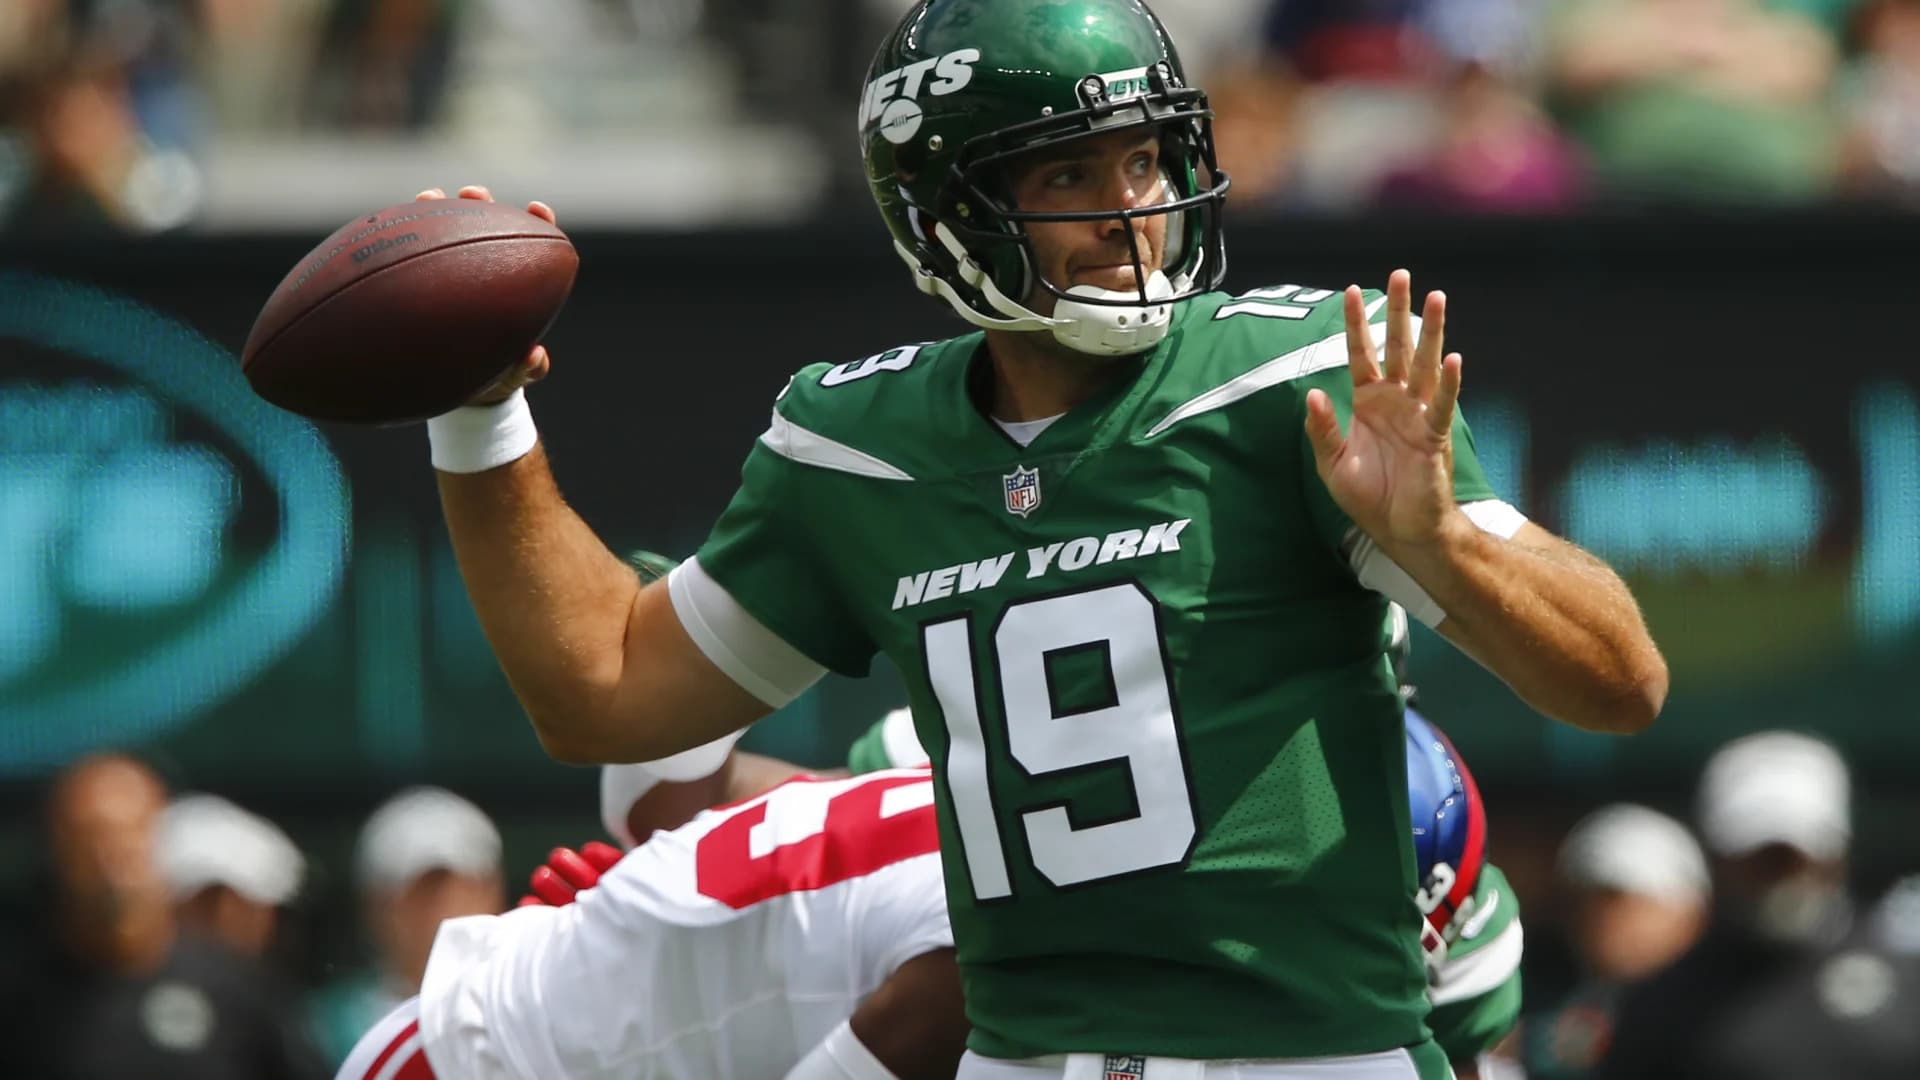 Flacco to start for Jets, Wilson out until at least Week 4